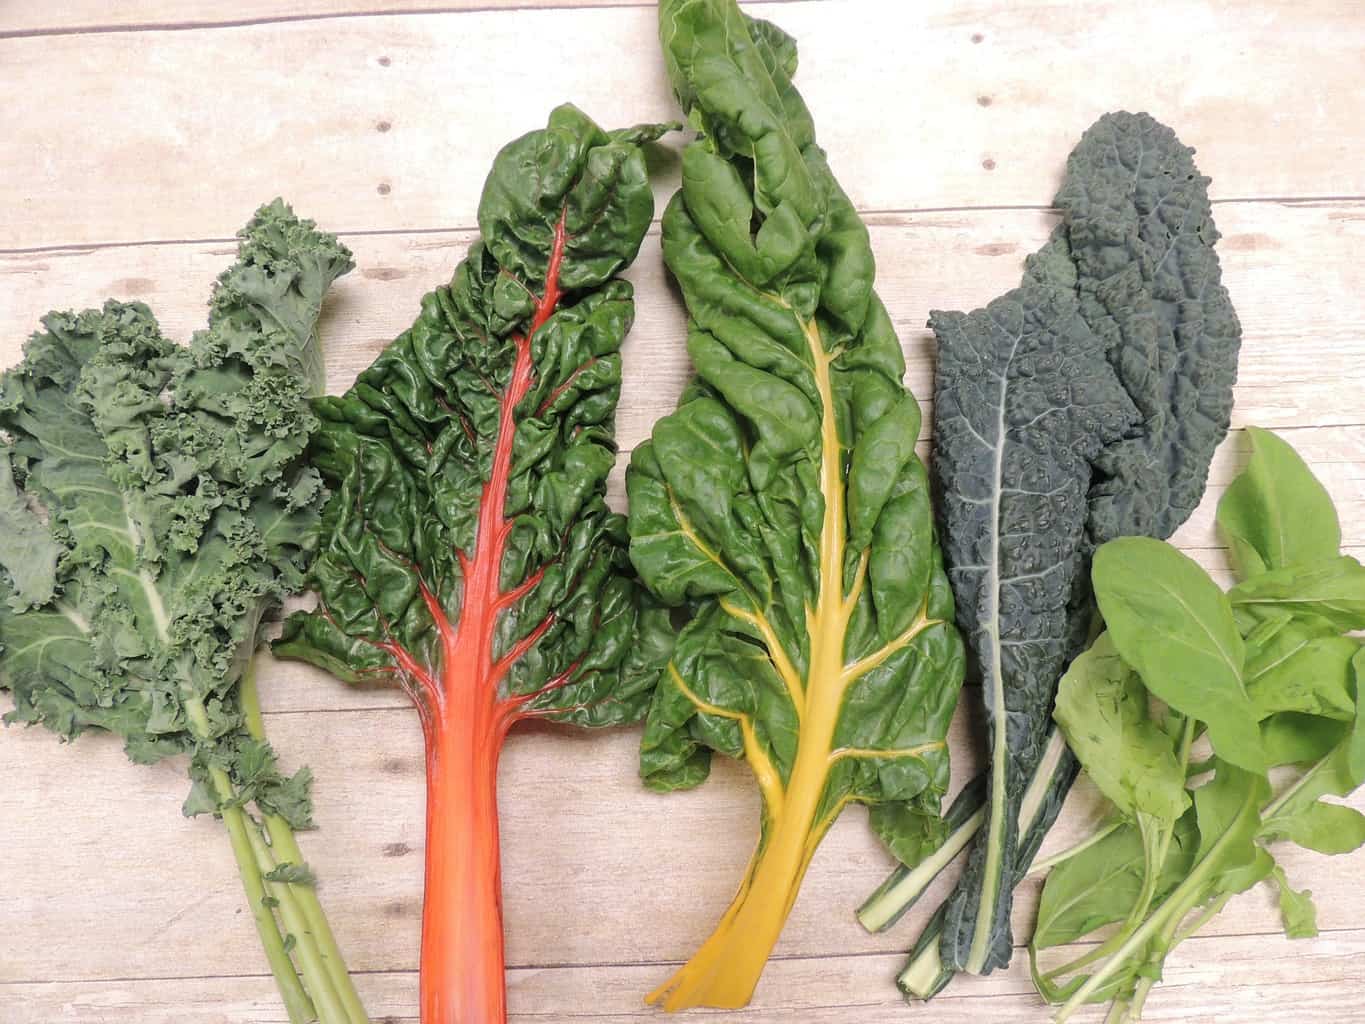 Green Leafy Vegetables A Healthy Way to Lose Weight